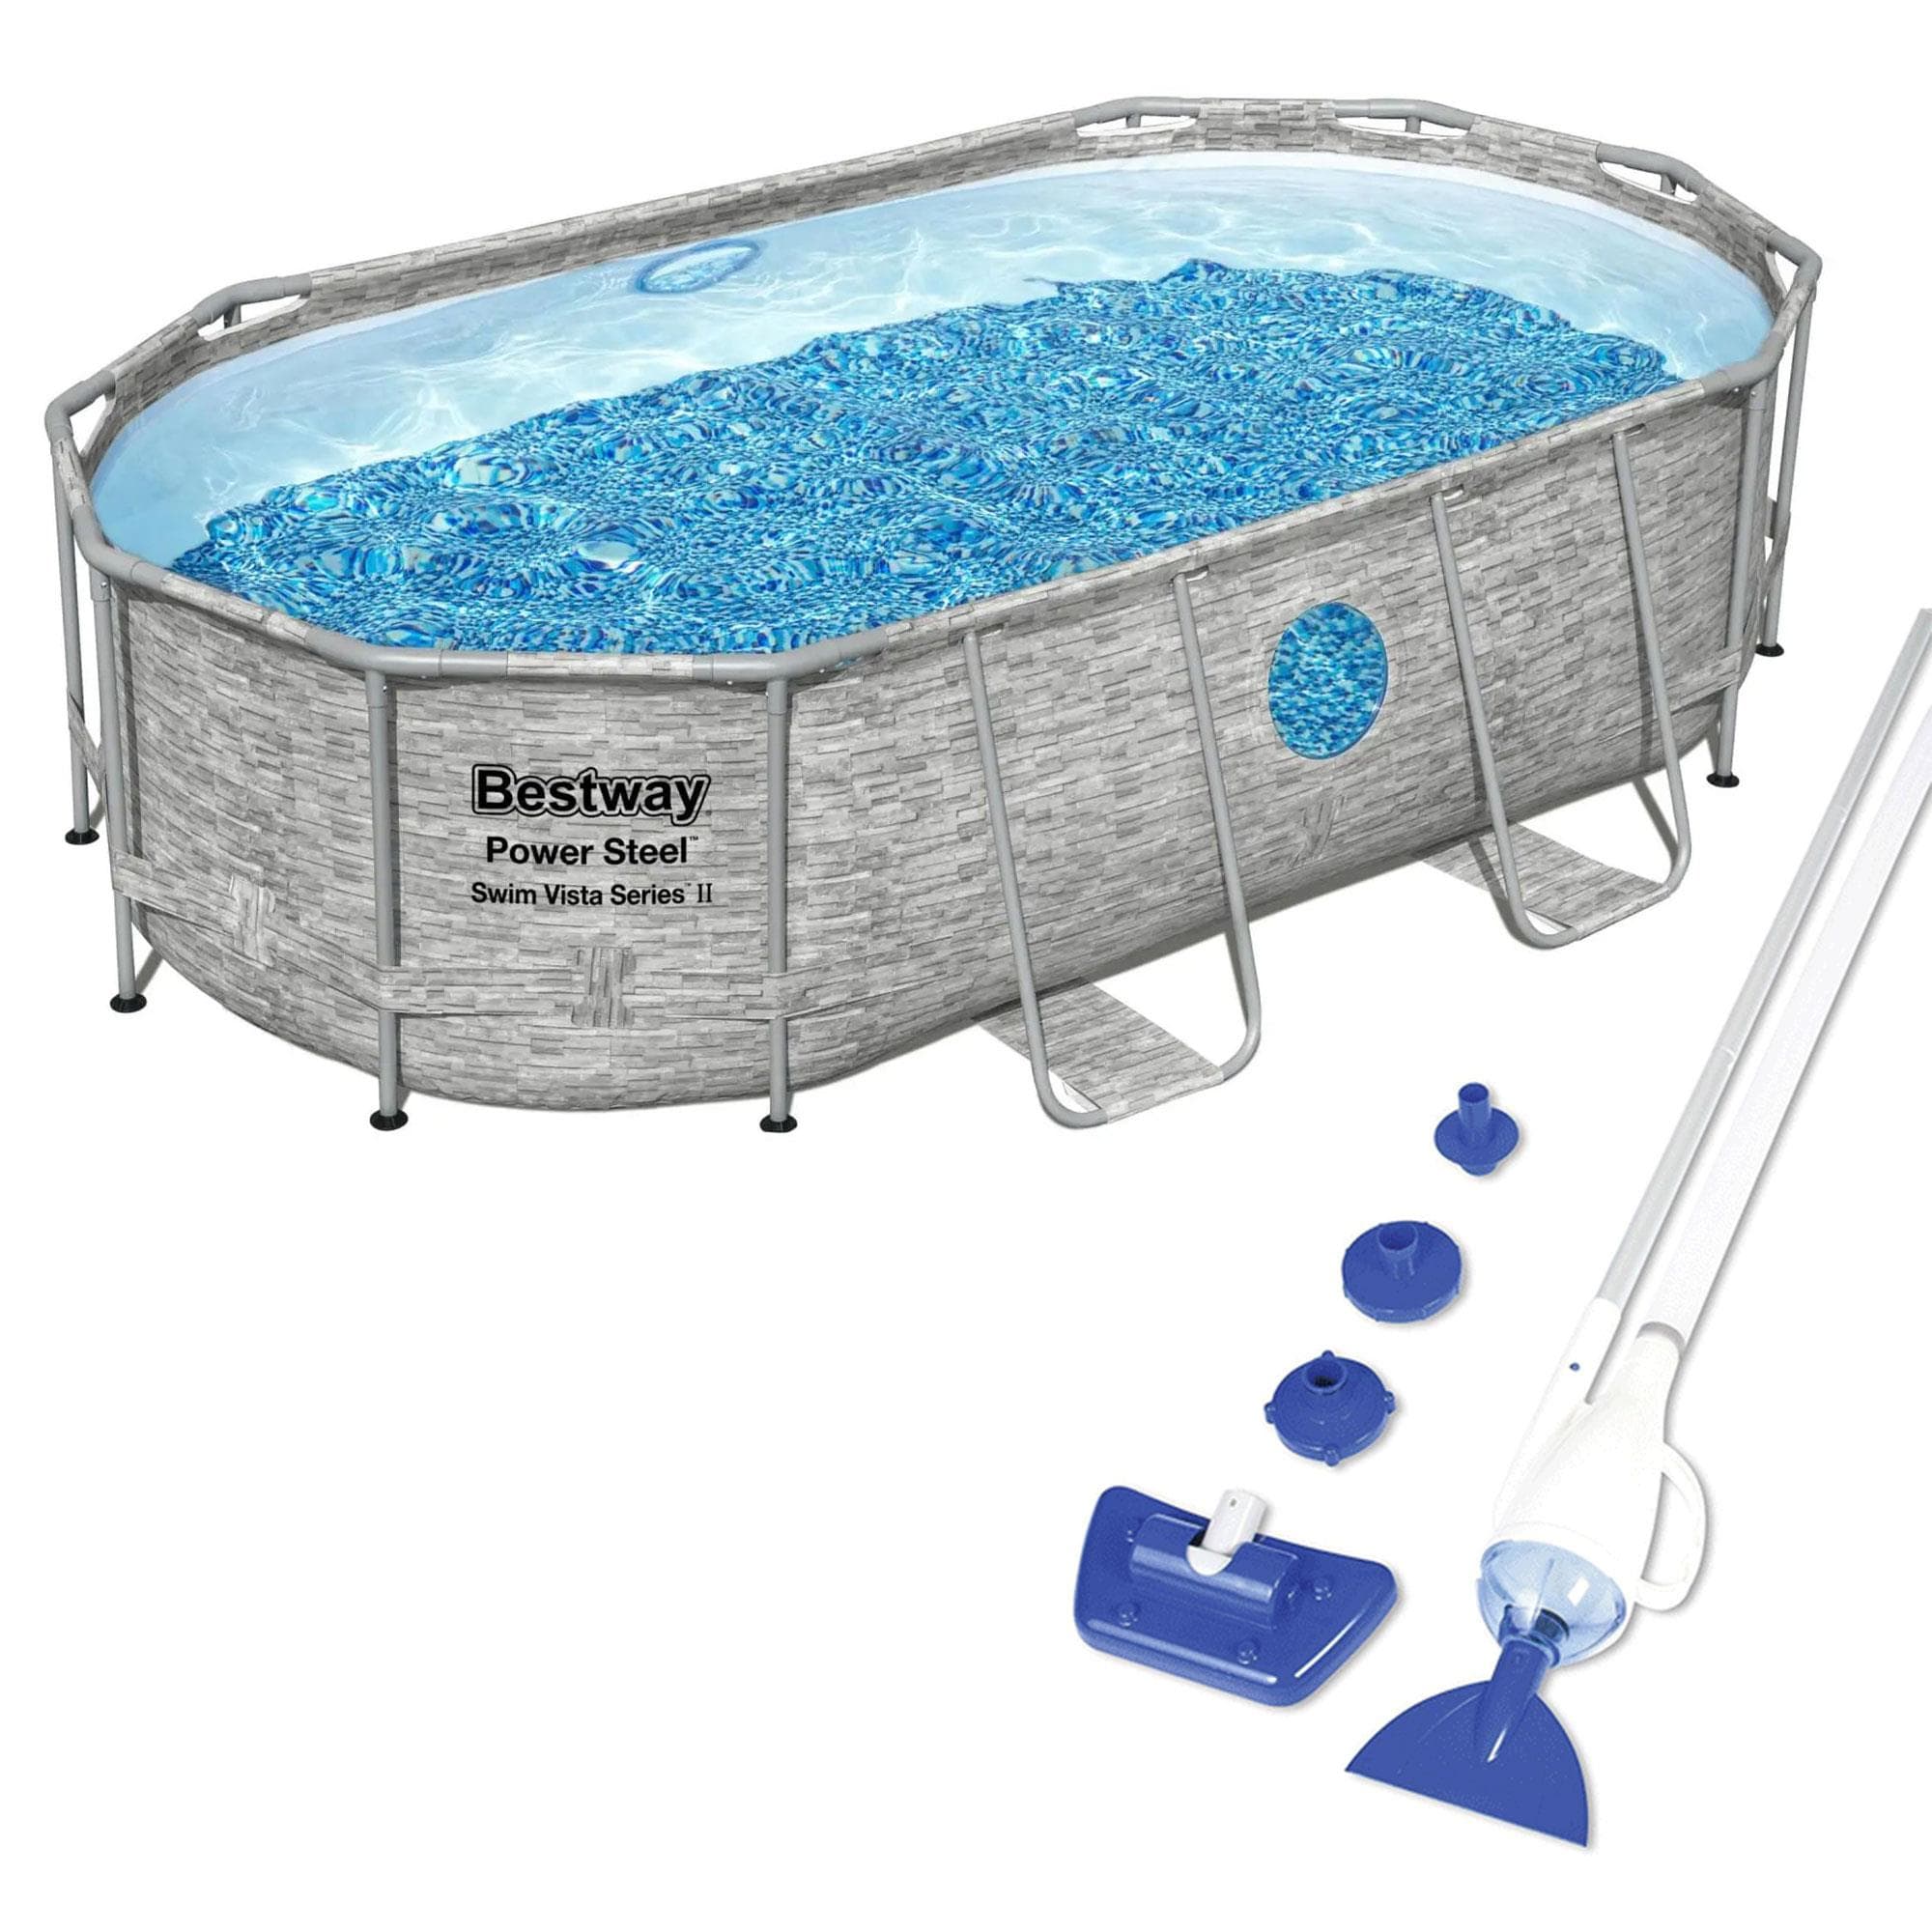 Bestway 14-ft the Ladder Pools with Above-Ground Pool and x at Cloth,Pool 8-ft 39.5-in x Cover Filter Pump,Ground Metal department in Above-Ground Oval Frame